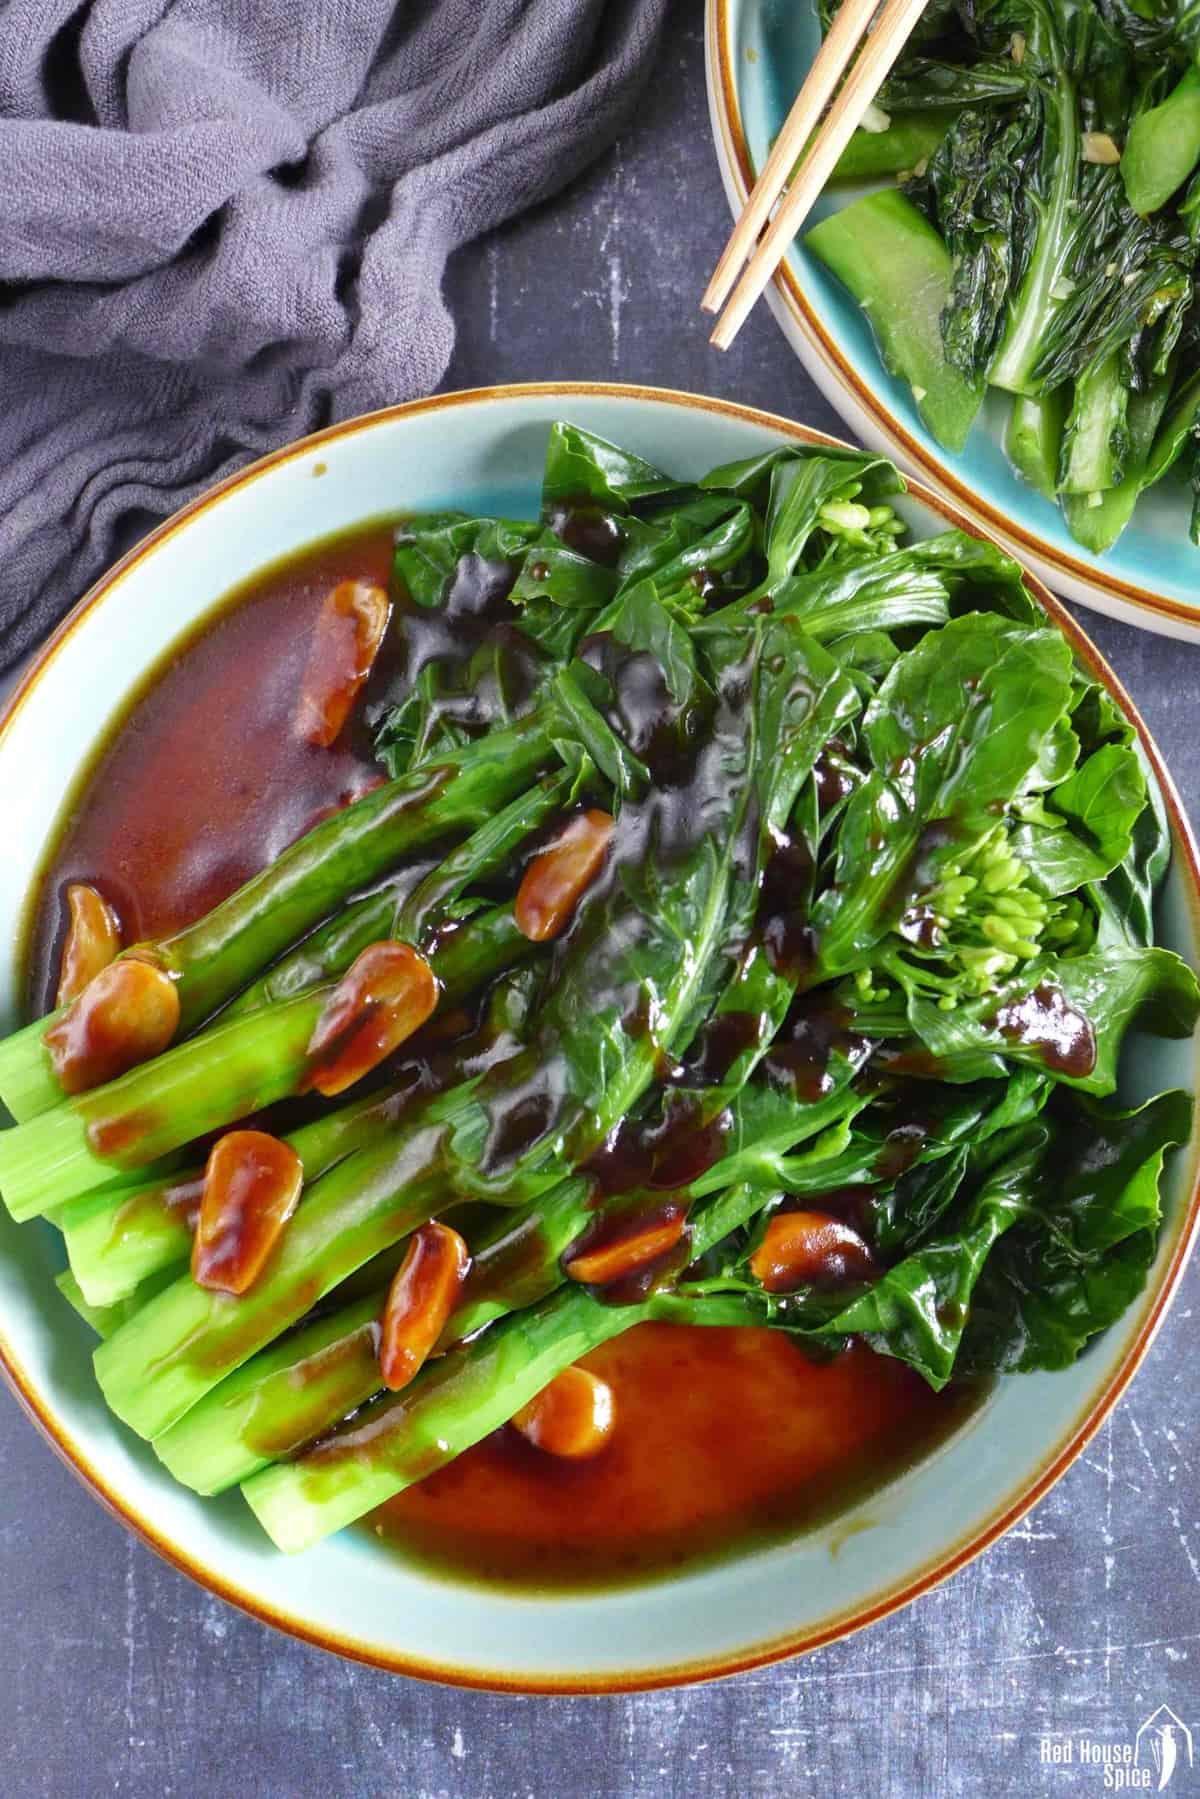 Chinese broccoli with oyster sauce and garlic.